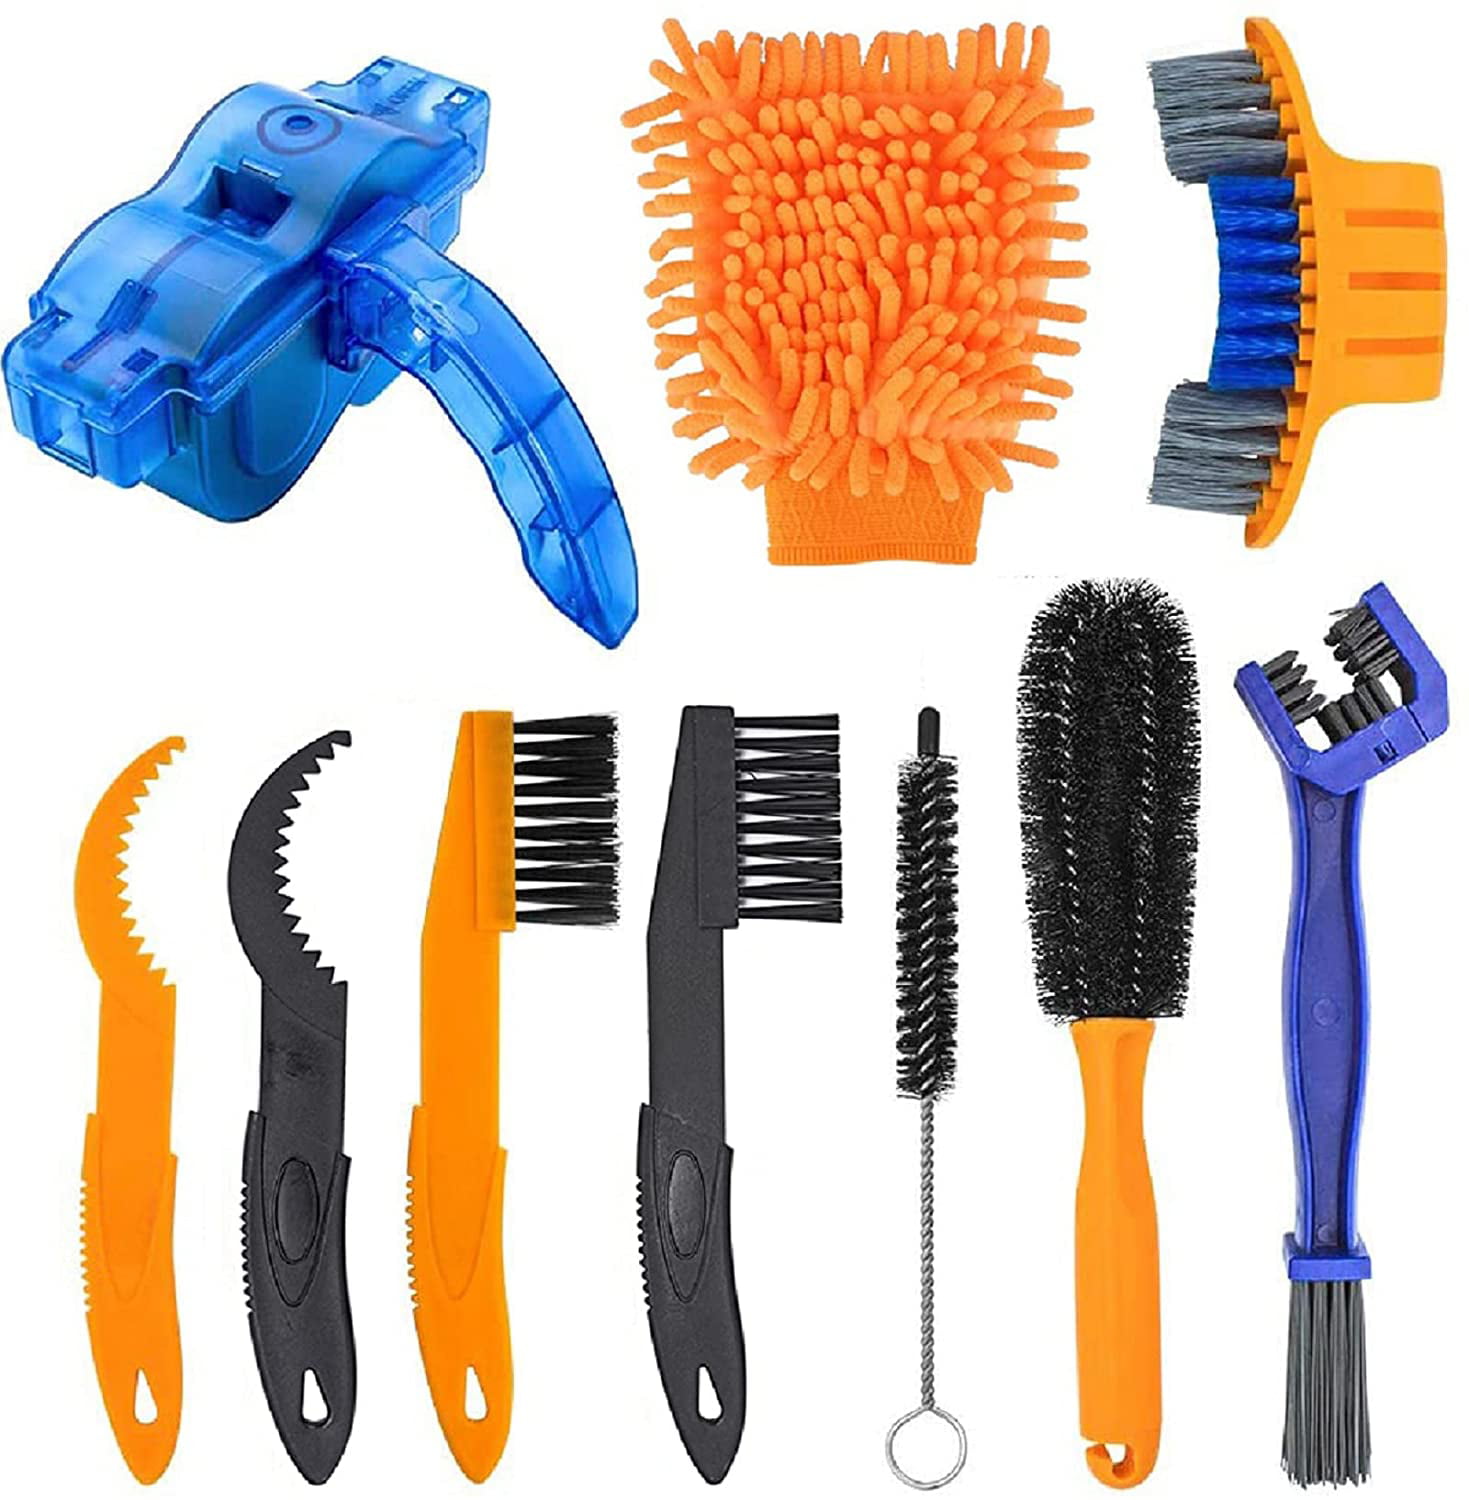 Cleaning Brushes Scrubber Cycling MTB Bike Bicycle Chain Wheel Wash Cleaner Set 